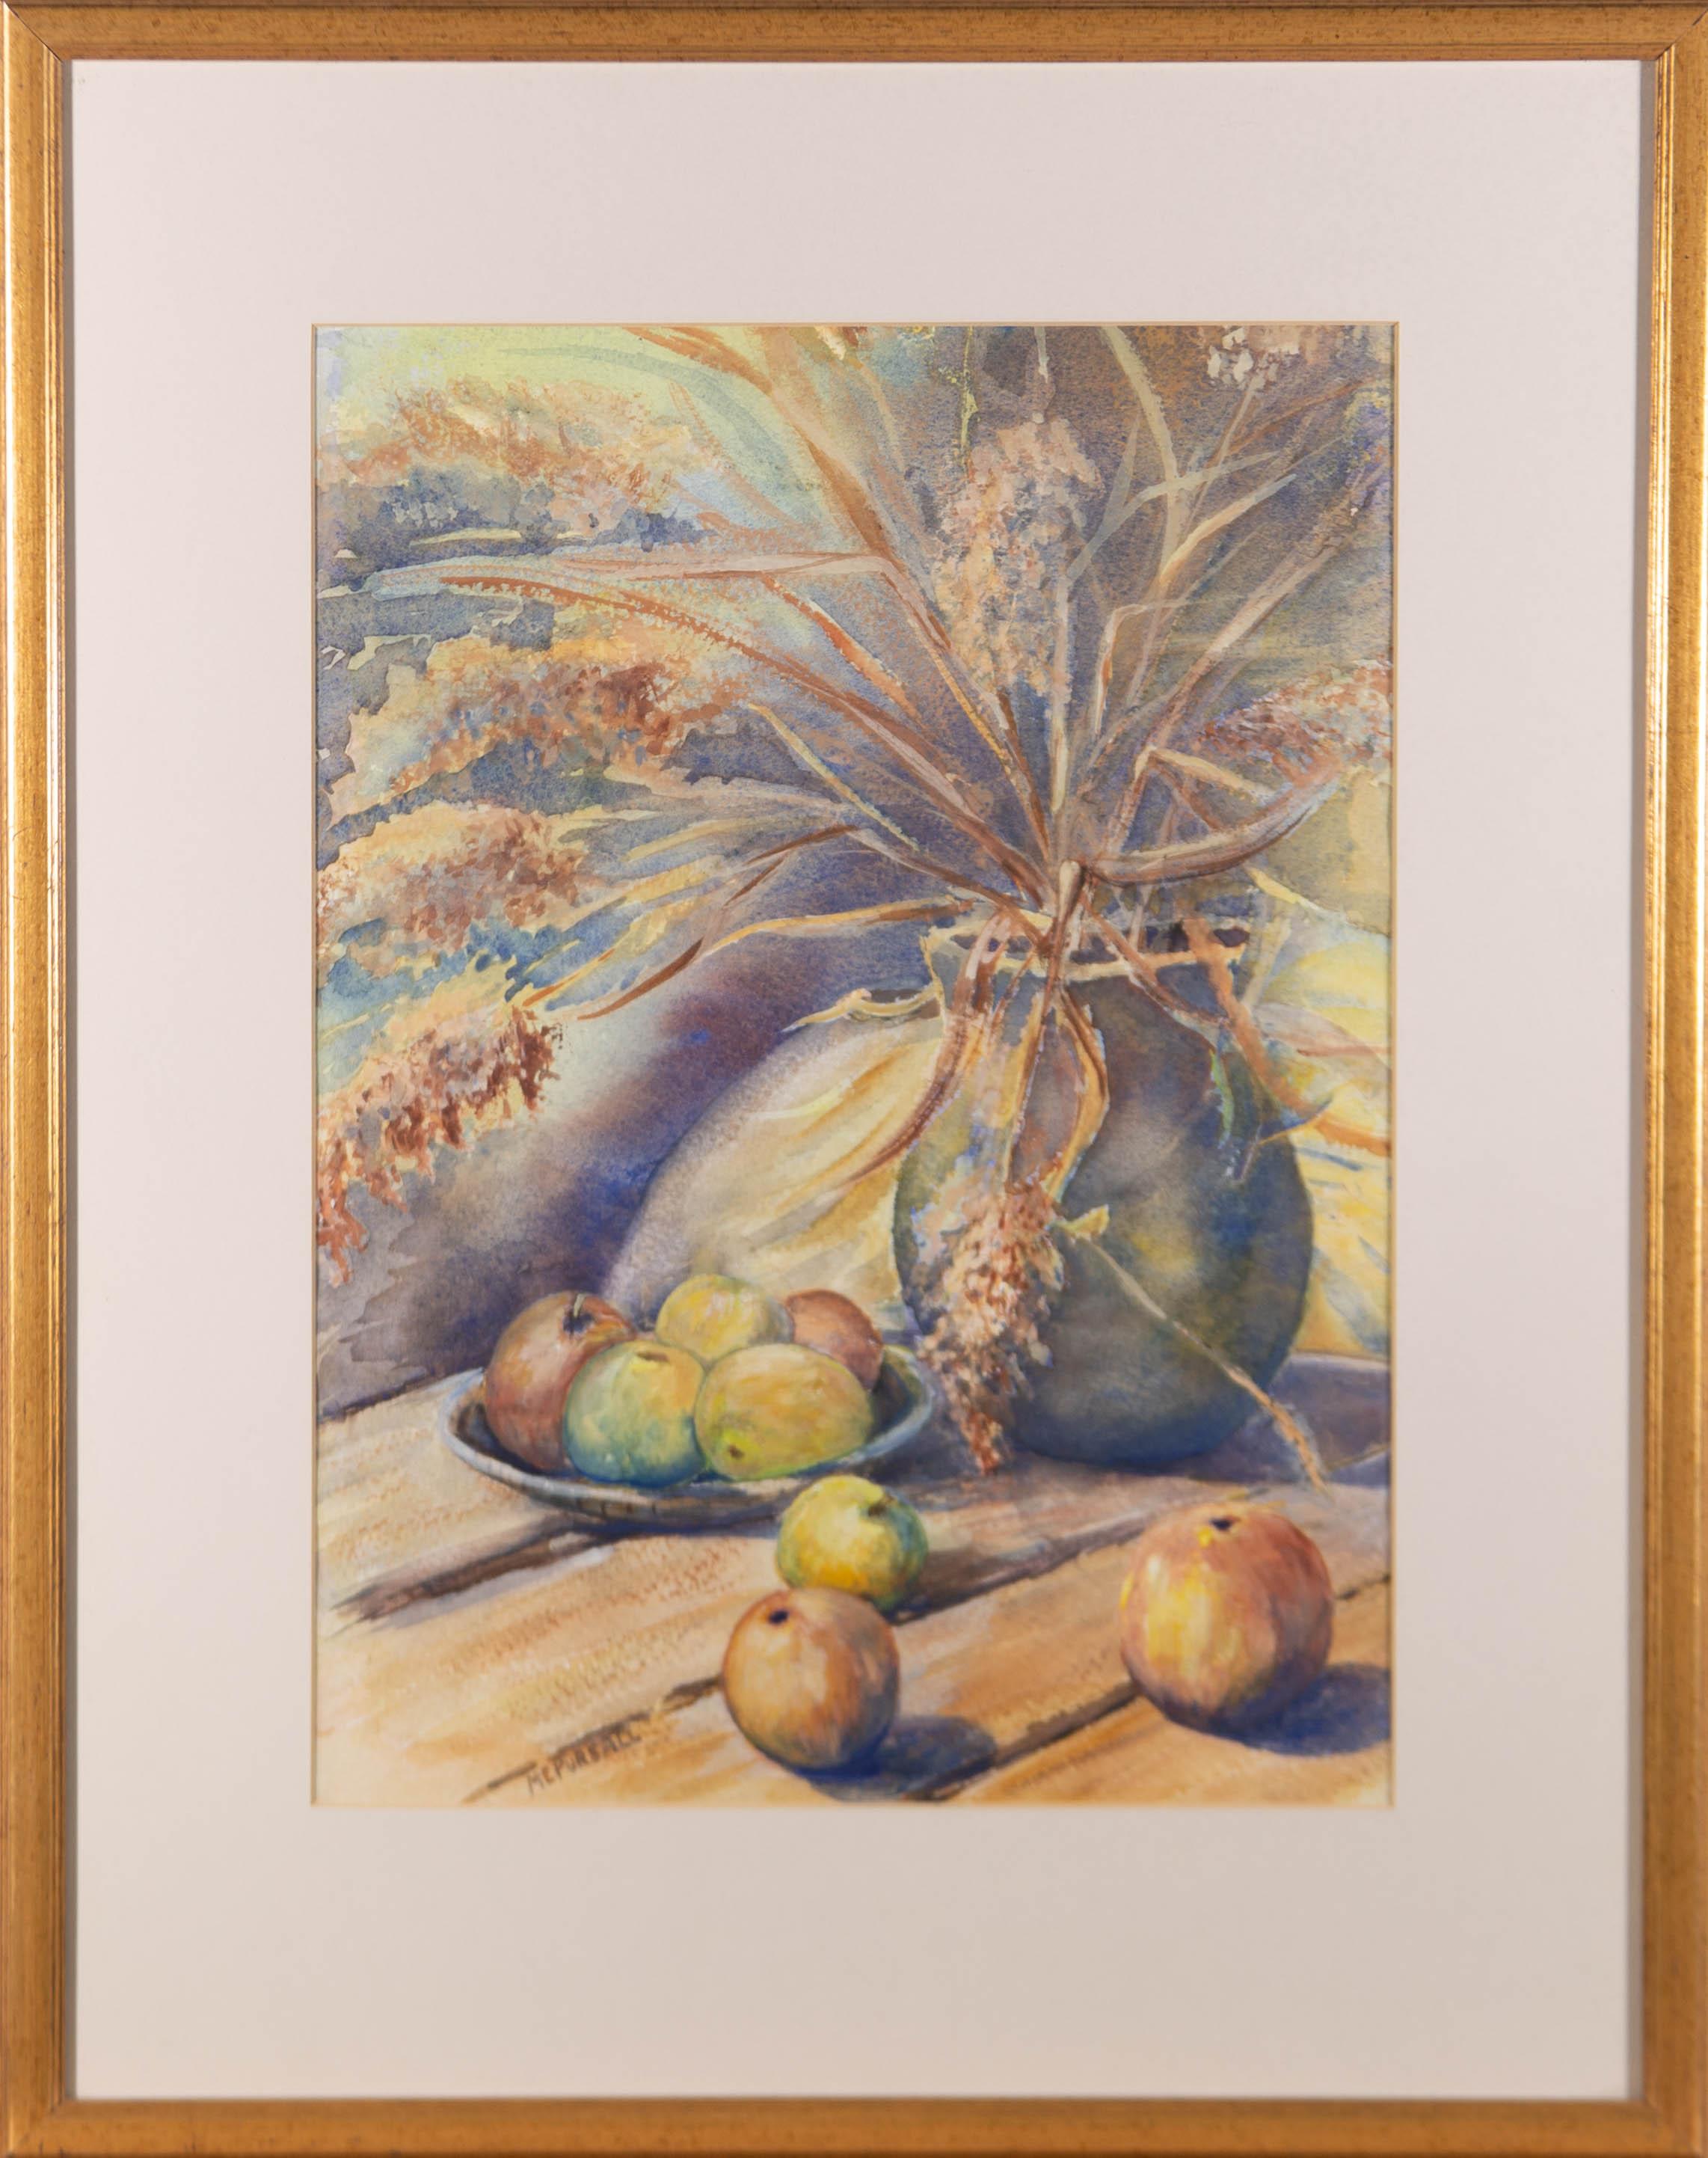 Unknown Still-Life - Basil E. Pursall - 20th Century Watercolour, Flower Vase and Apples